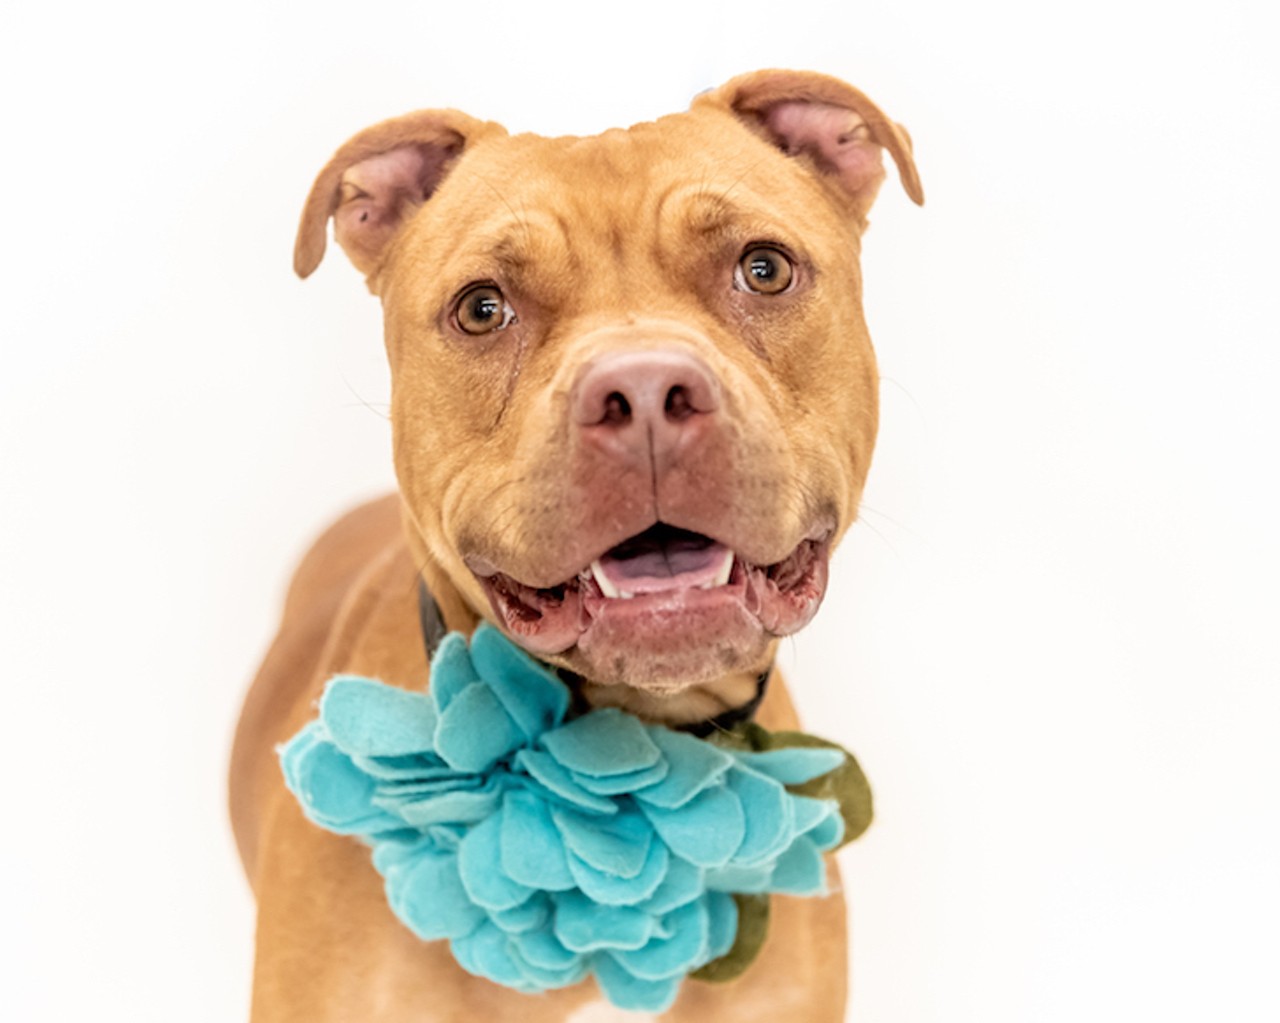 These adoptable Orange County dogs are waiting to meet you right now